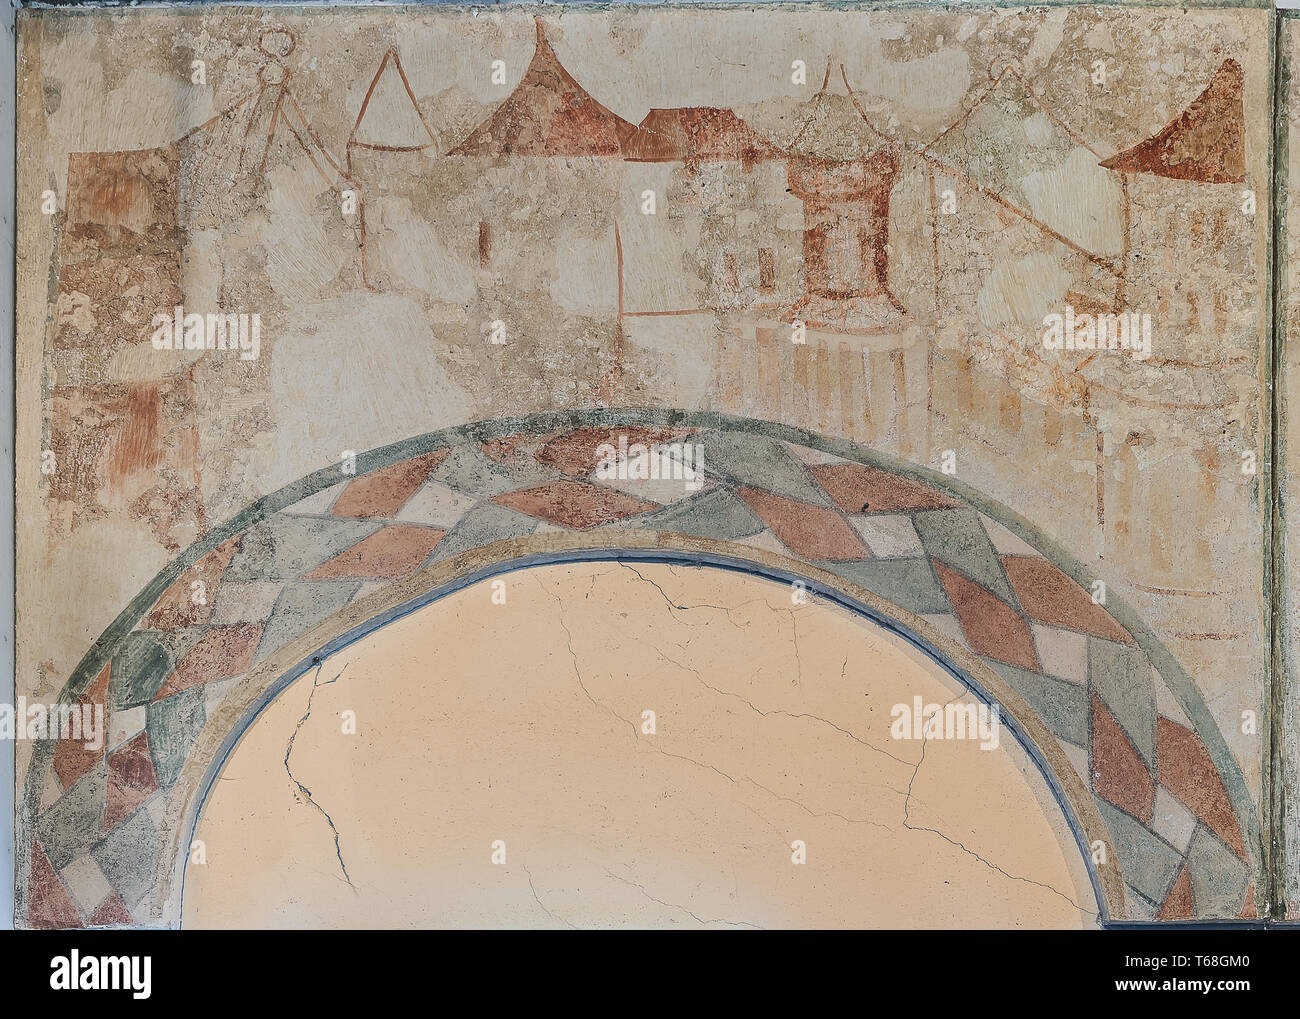 Oriental city with houses, painted on the wall over an arch, a 500 years old gotic mural in Tirsted church, Denmark, April 17, 2019 Stock Photo